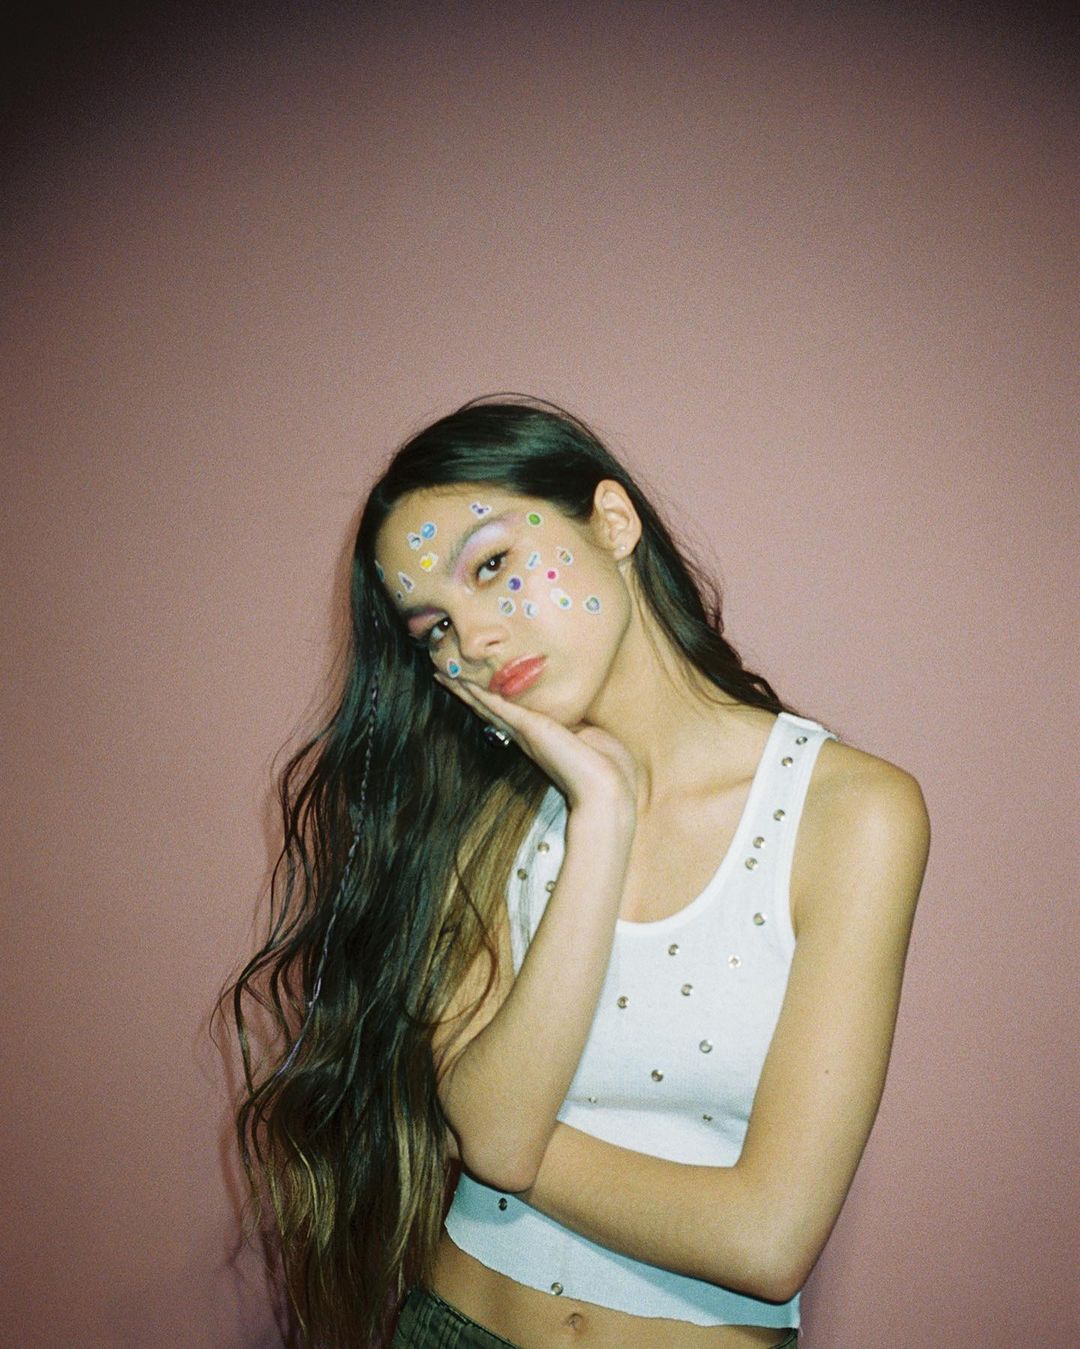 A photo of Olivia Rodrigo, whose faces is decorated with lovely stickers, wearing a white crop top and denim pant.